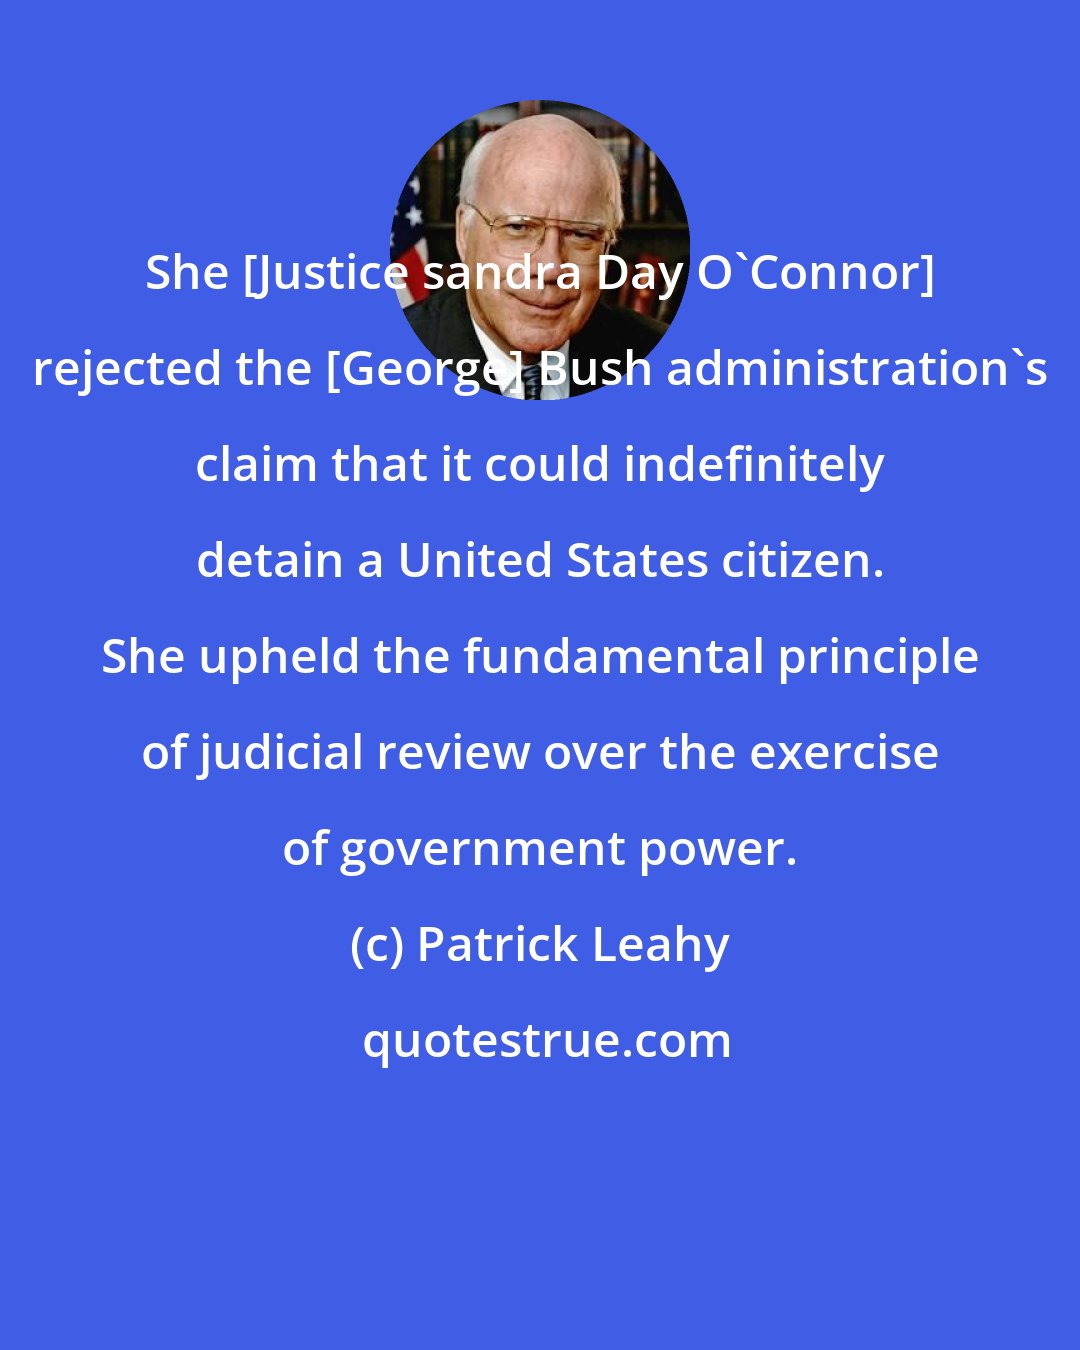 Patrick Leahy: She [Justice sandra Day O'Connor] rejected the [George] Bush administration's claim that it could indefinitely detain a United States citizen. She upheld the fundamental principle of judicial review over the exercise of government power.